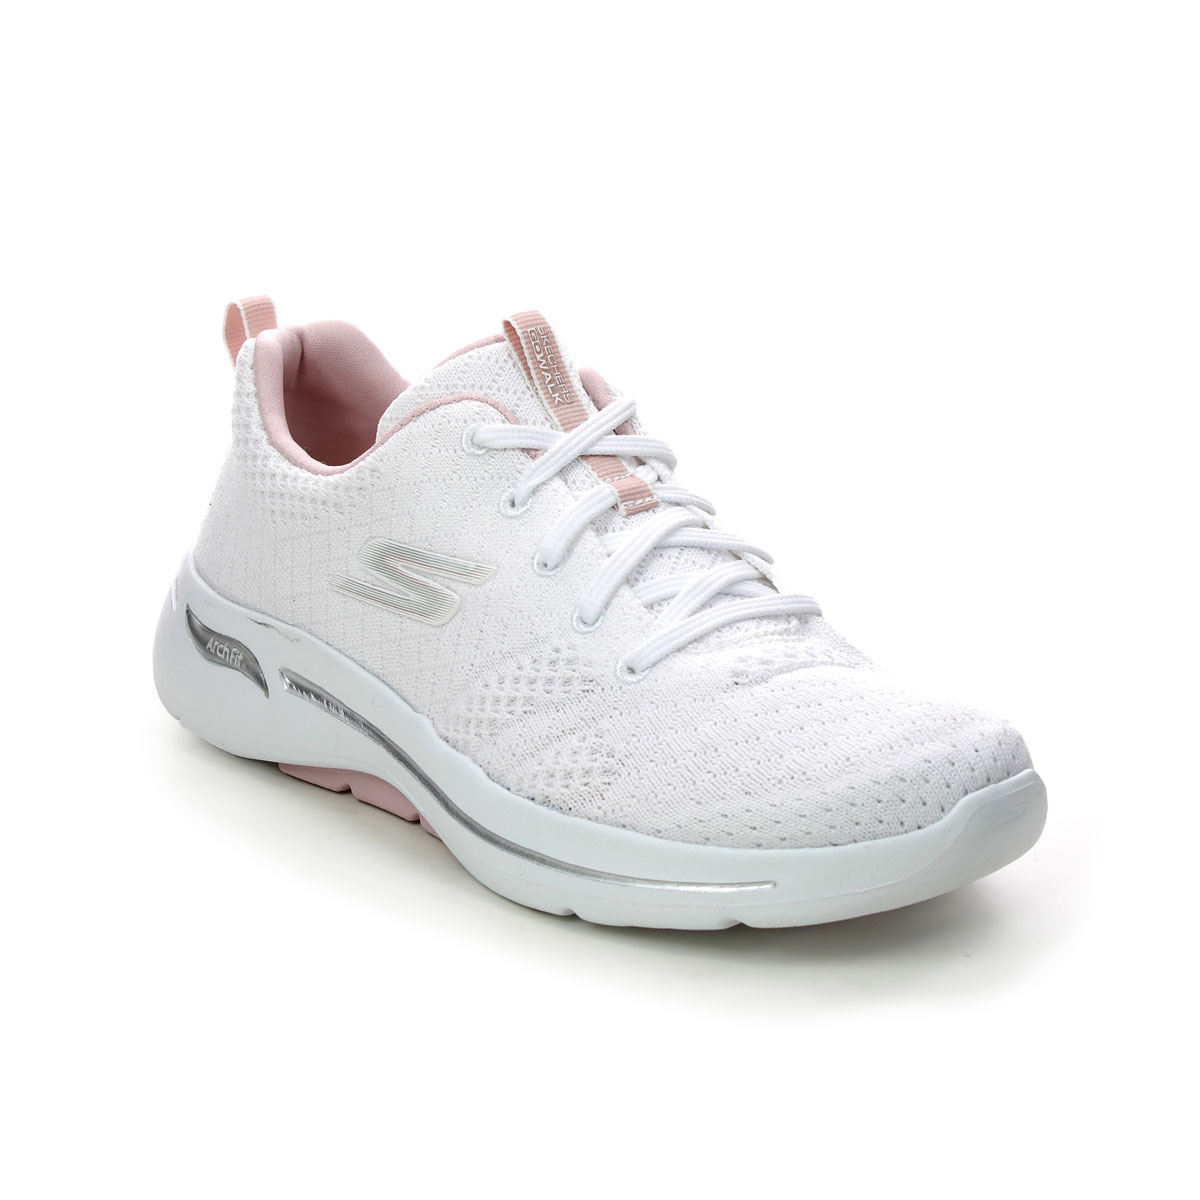 Picante ratón Jadeo Skechers Arch Fit Go Walk 124403 WLPK White Light Pink trainers